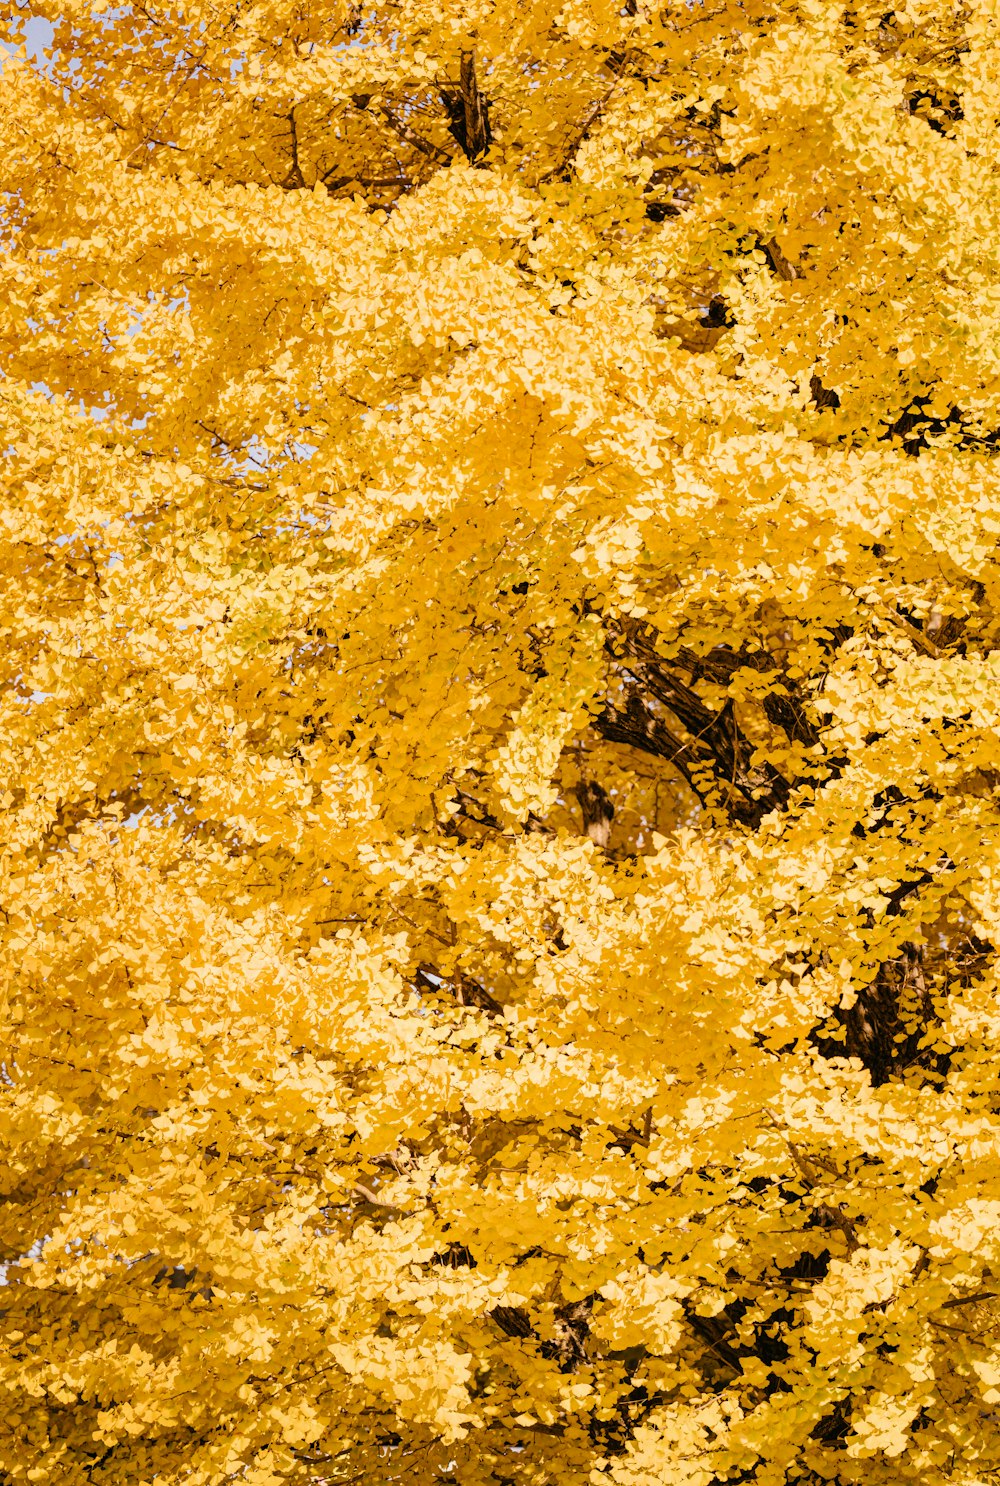 a close up of a yellow substance